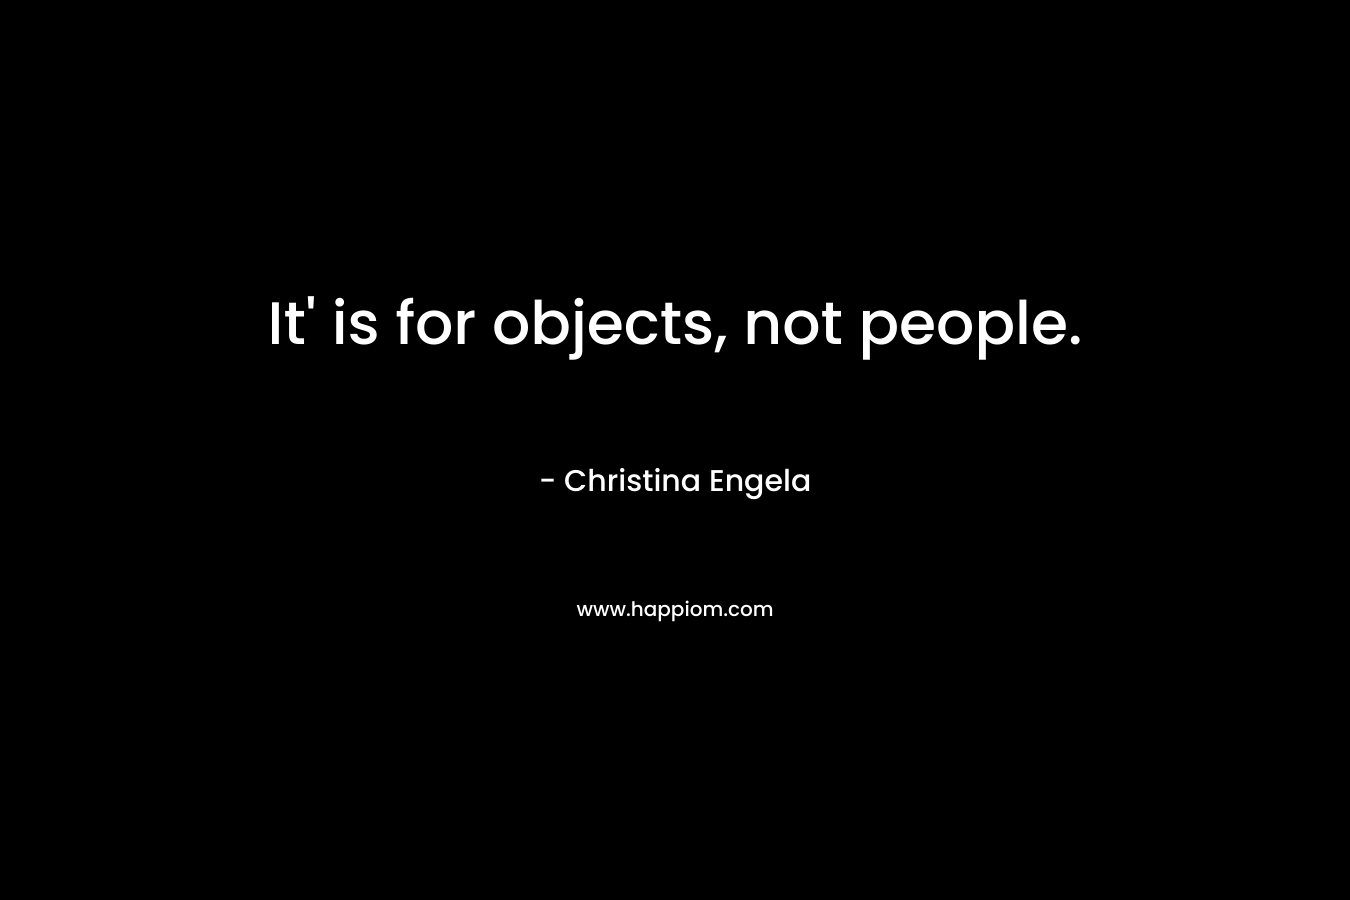 It' is for objects, not people.